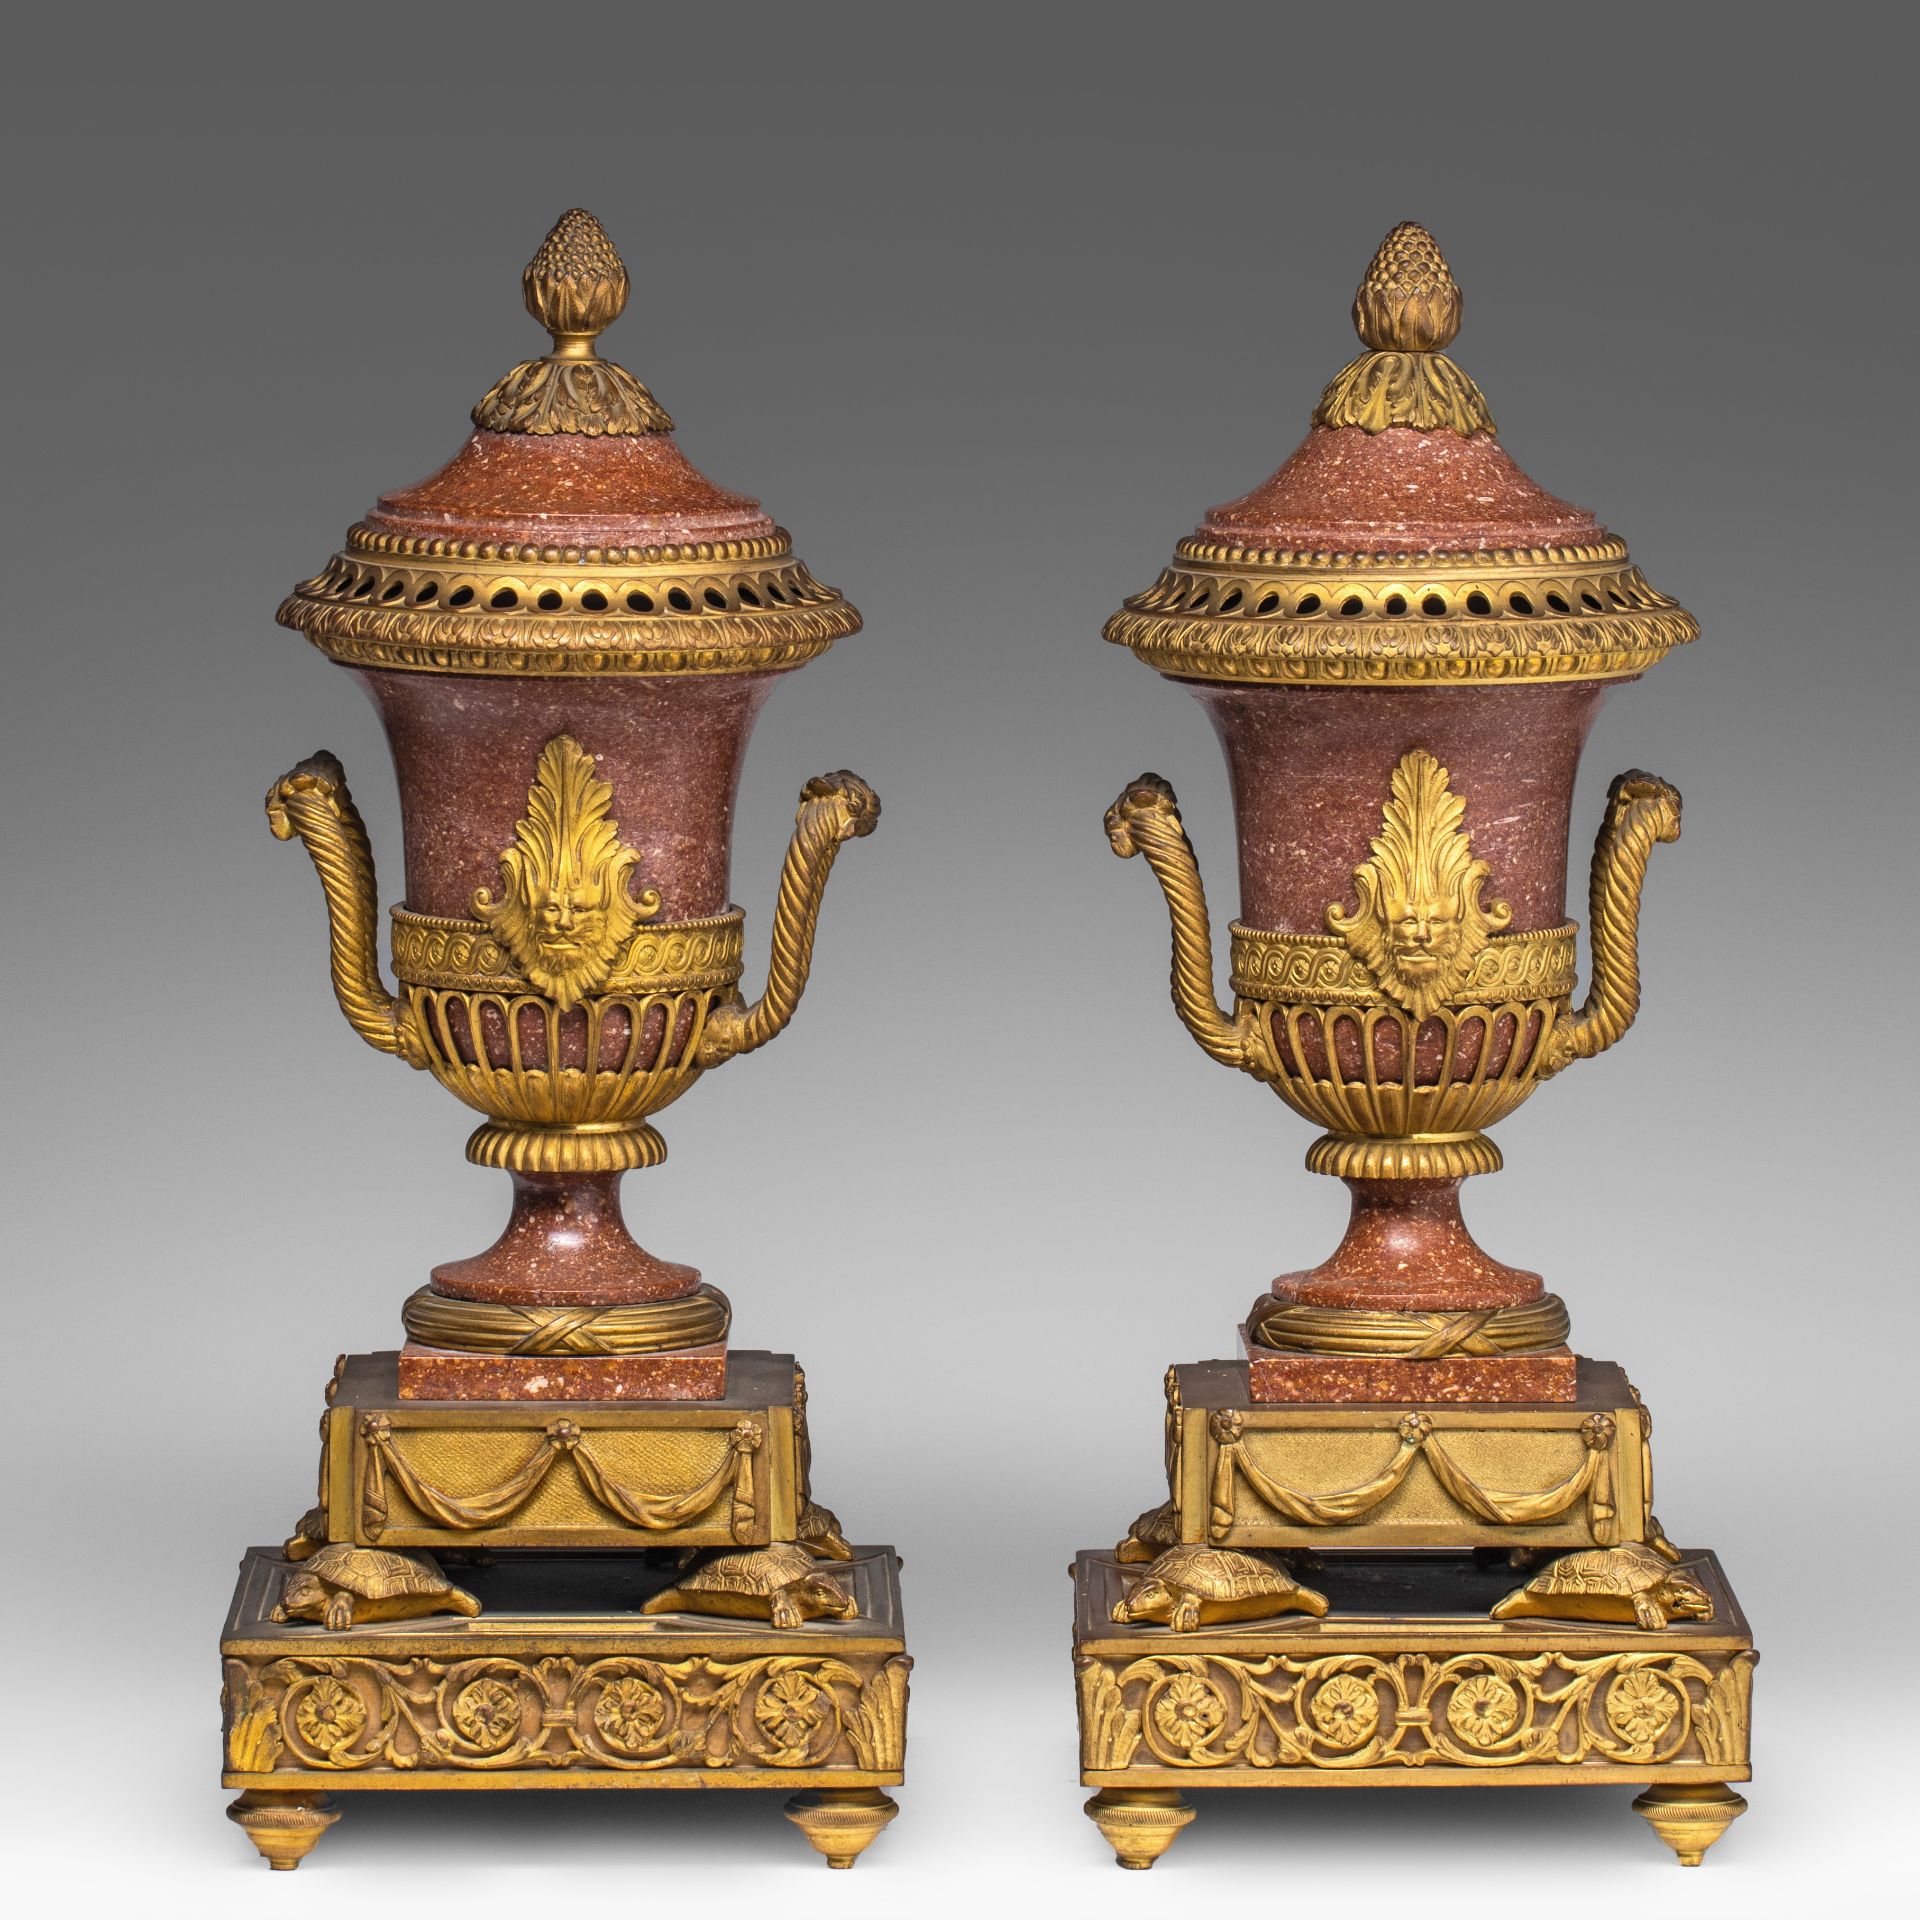 A pair of Neoclassical gilt bronze-mounted porphyry cassolettes, 19thC, H 35 cm - Image 8 of 8